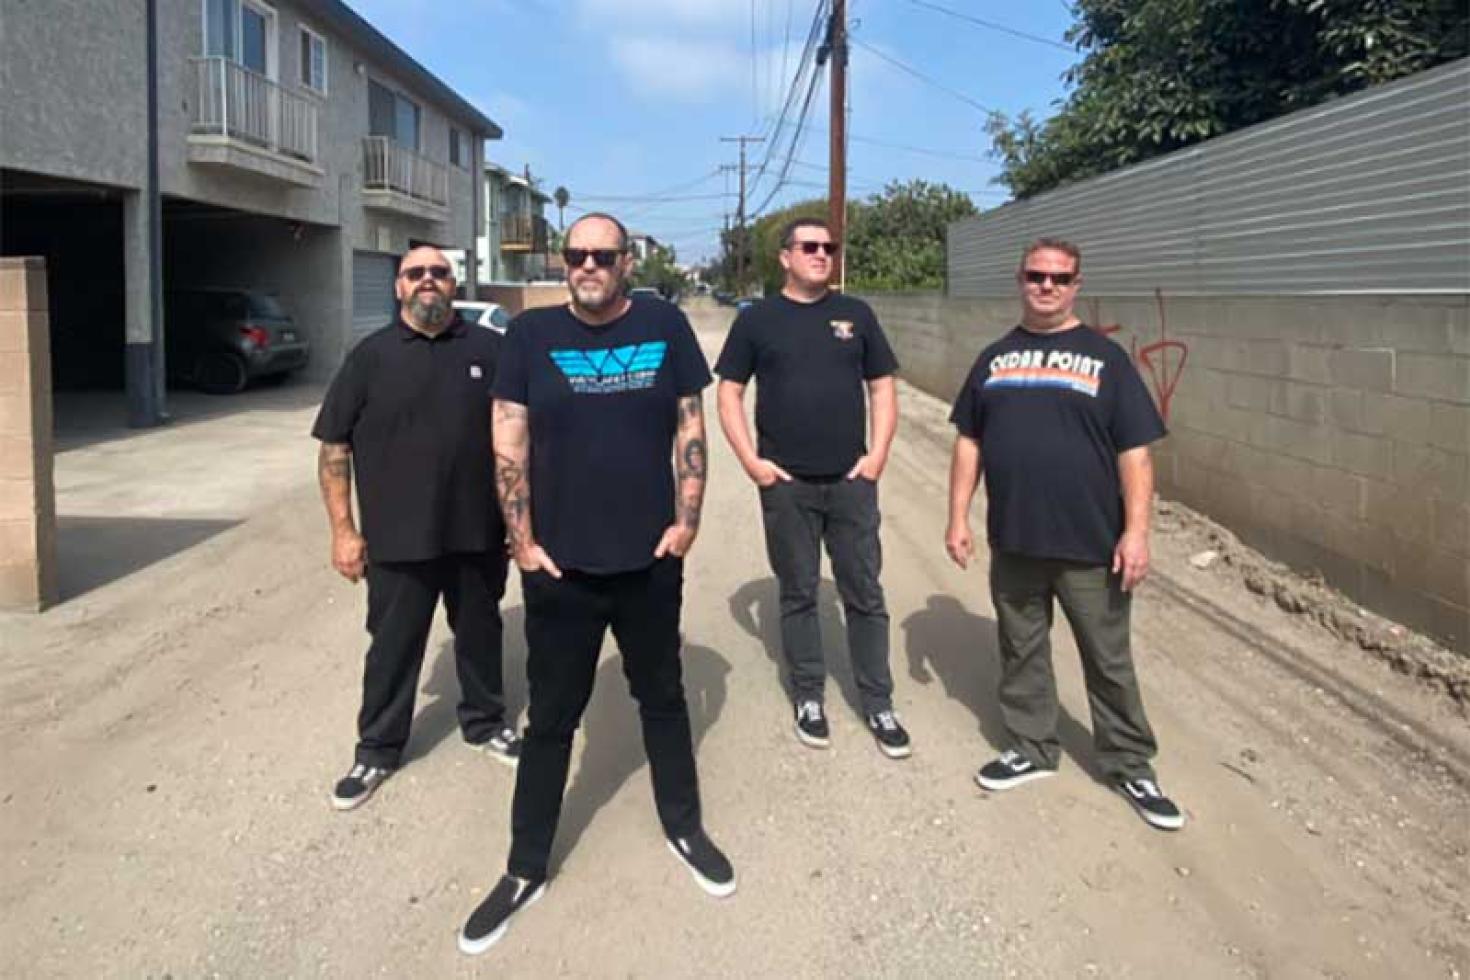 Jughead's Revenge release new single 'I'll Be Seeing You'